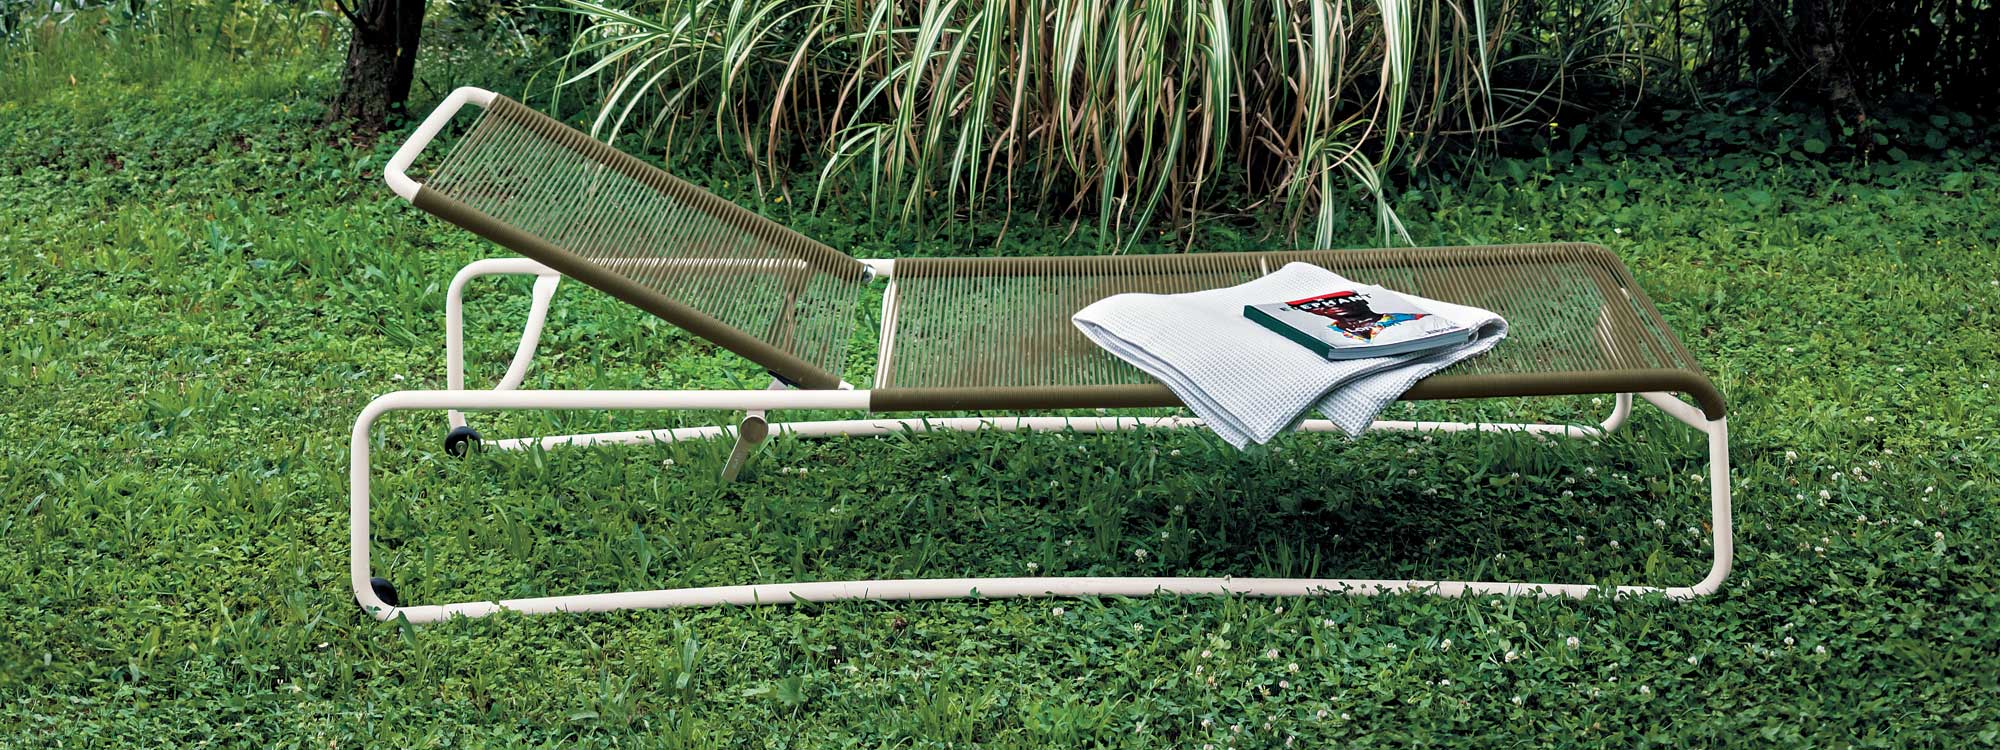 Harp modern sunbed on grass, with frame in milk colour and brown chord